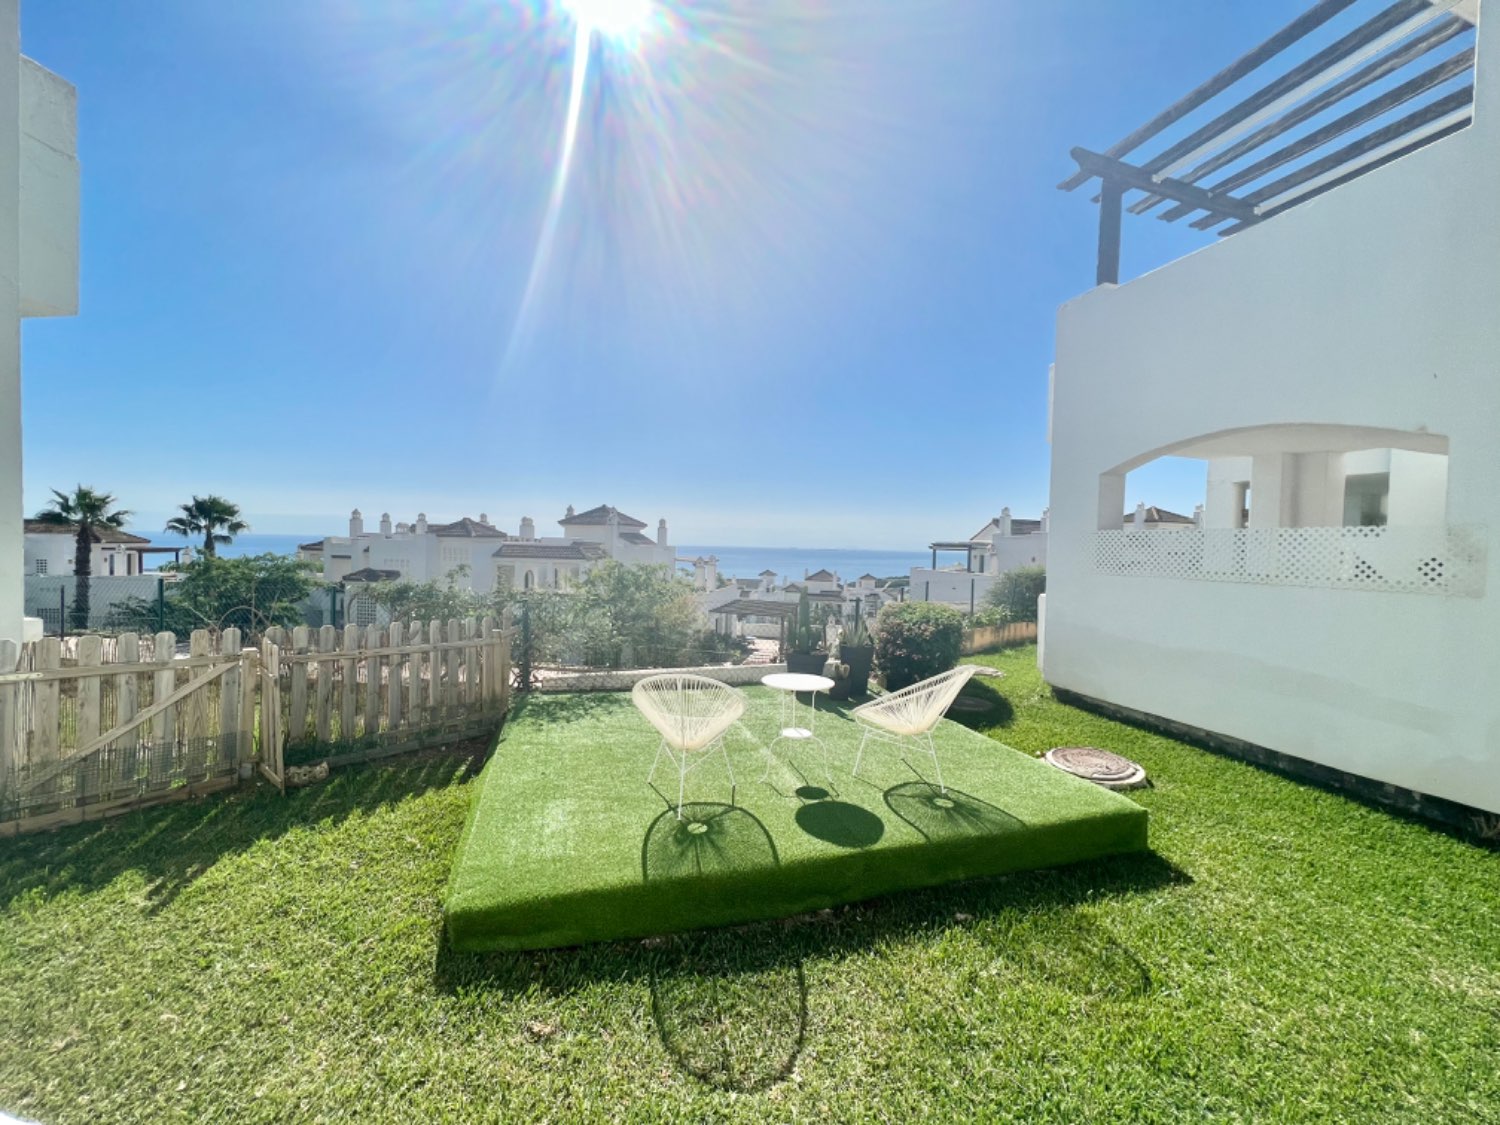 Two-bedroom garden apartment with beautiful sea views